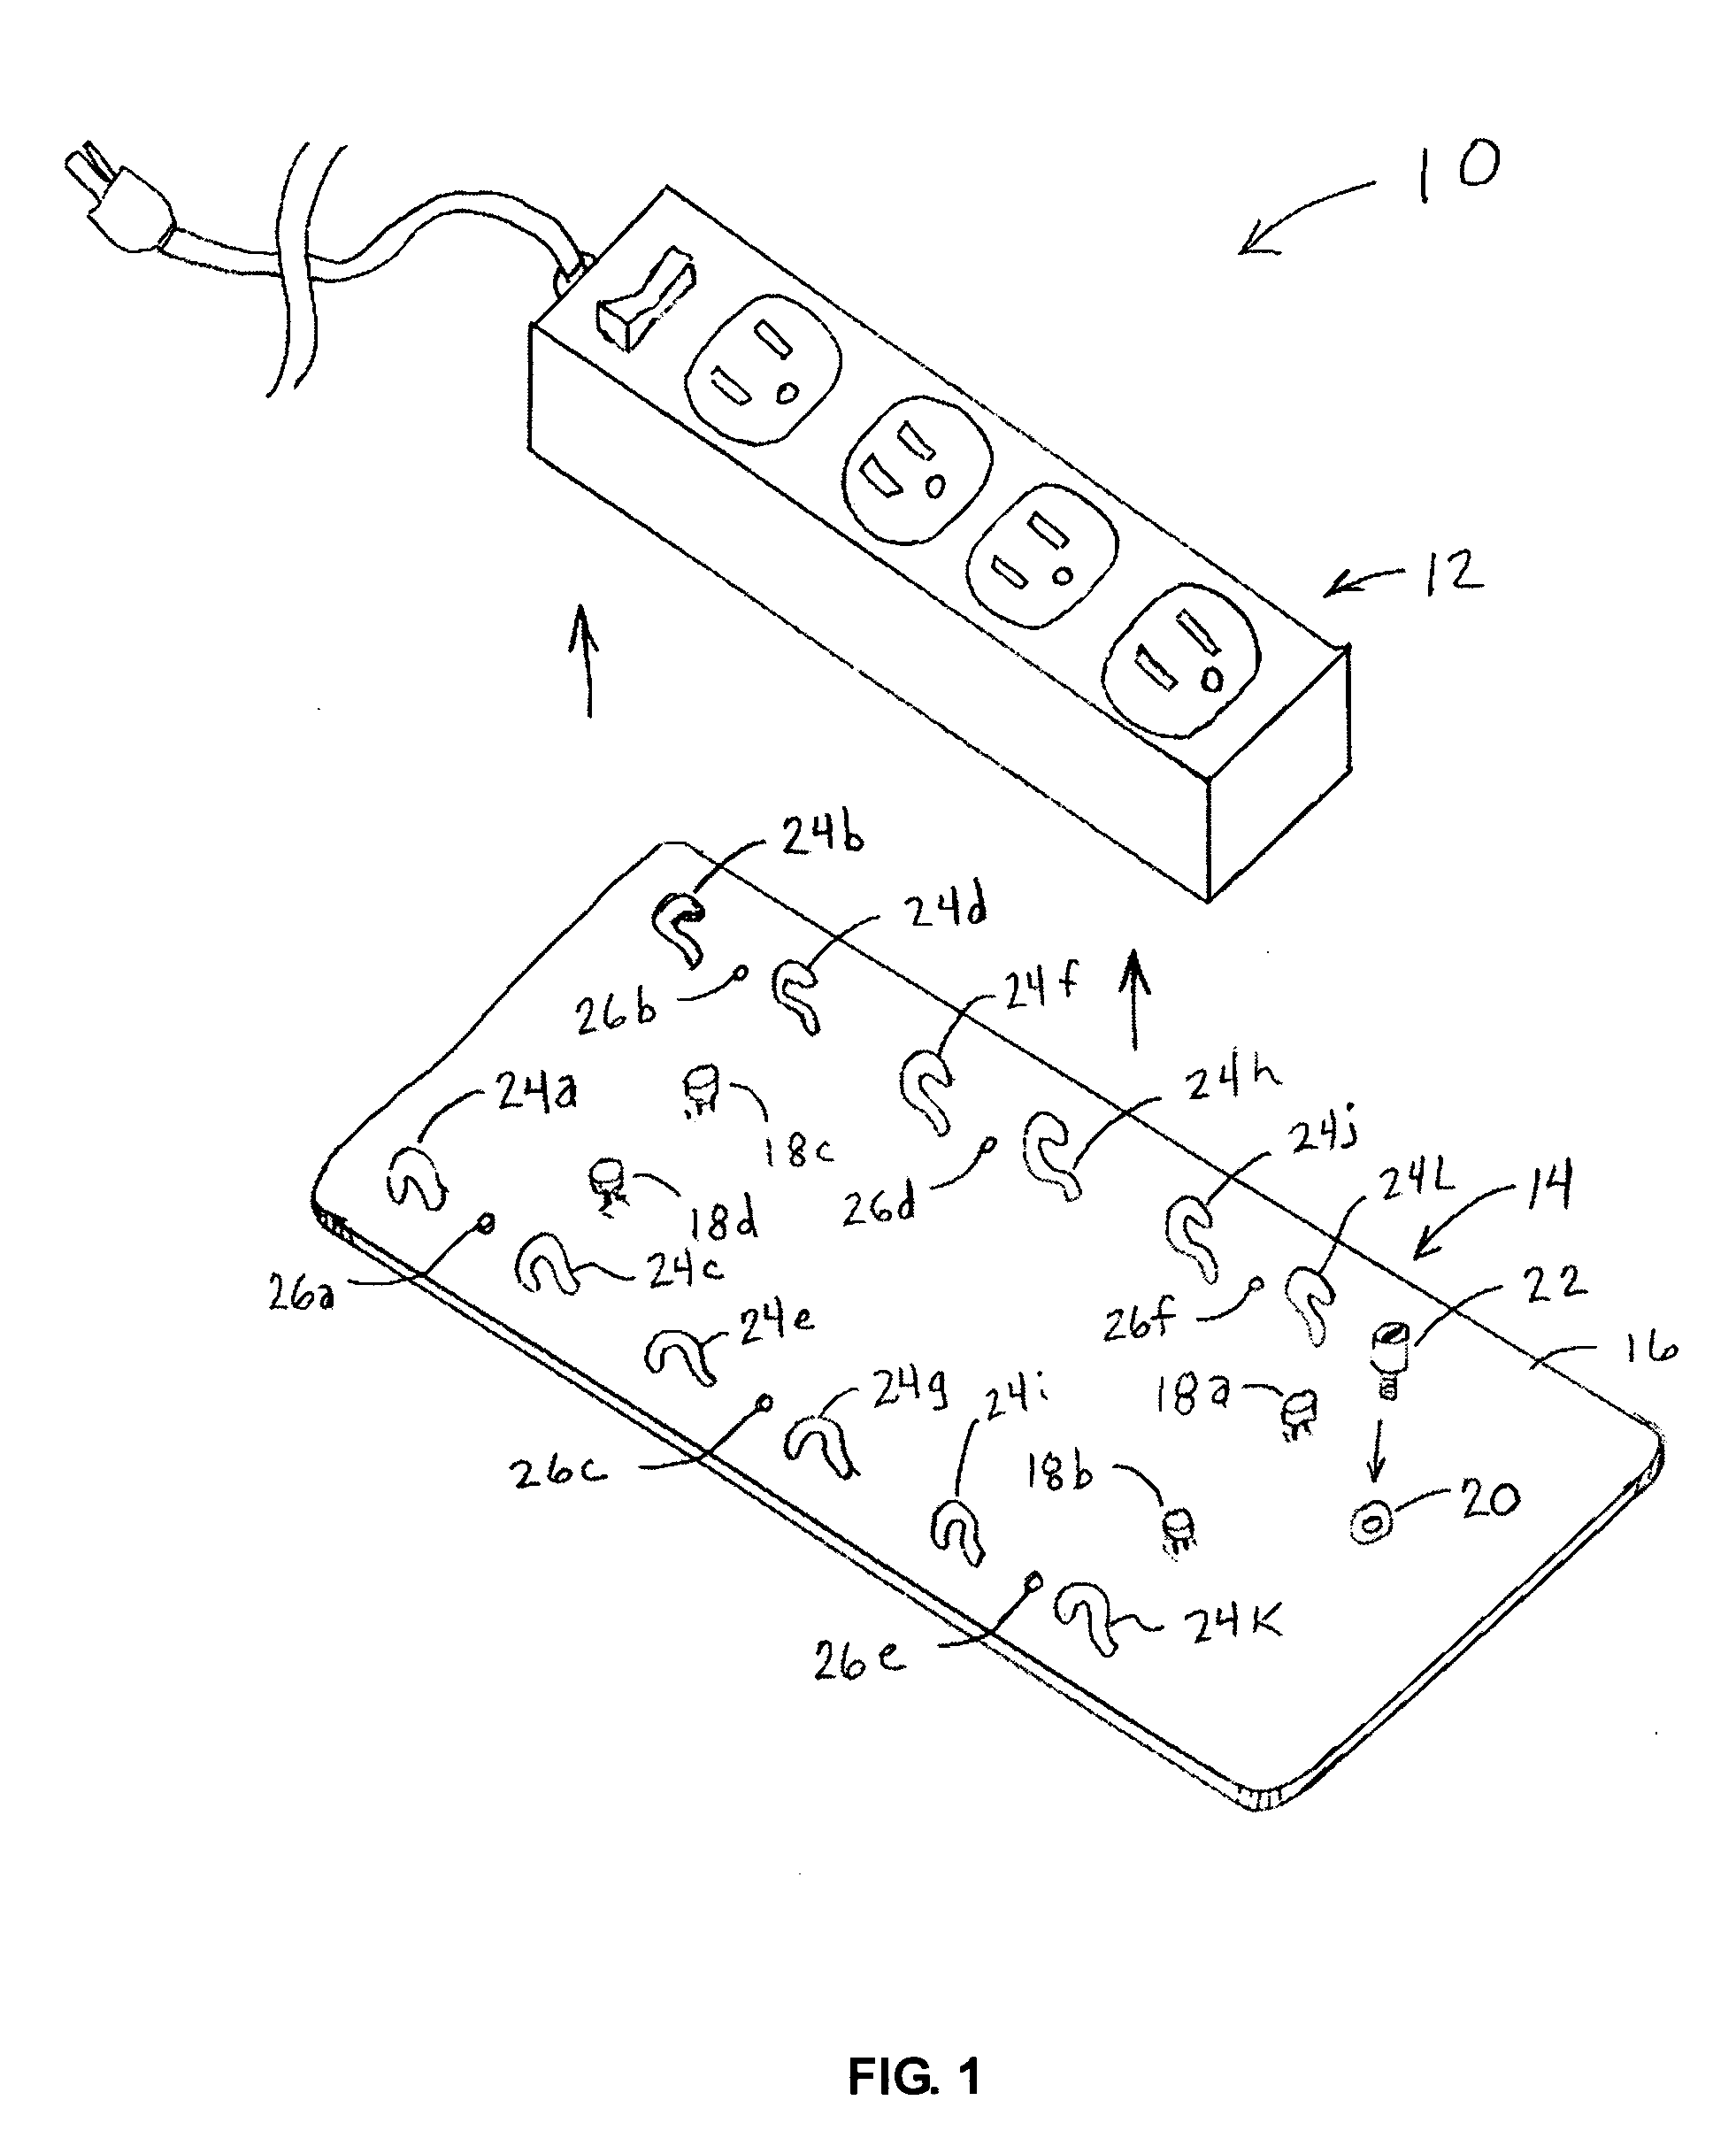 Underdesk apparatus for organizing electronics and connections